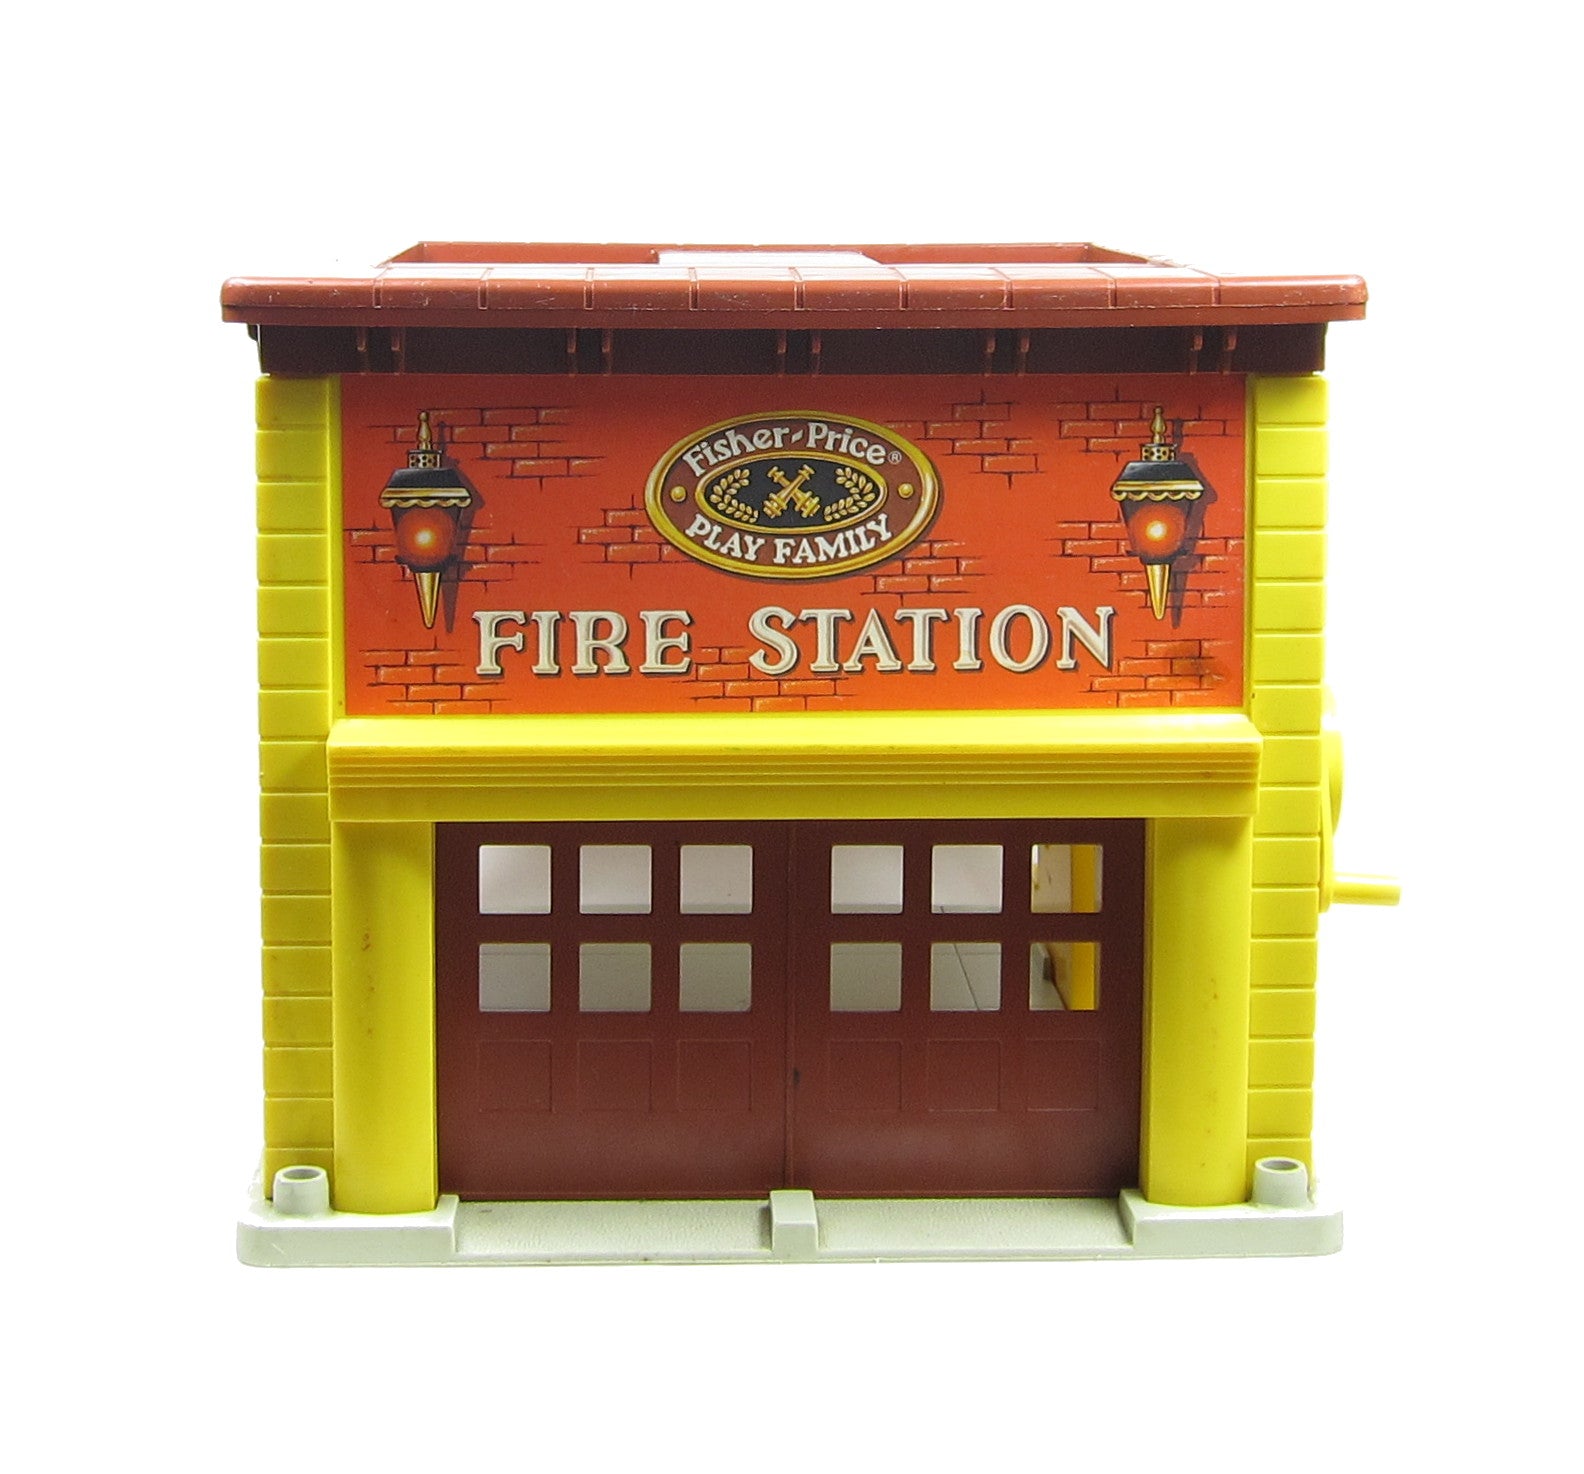 Fisher-Price Fire Station Play Family Little People playset